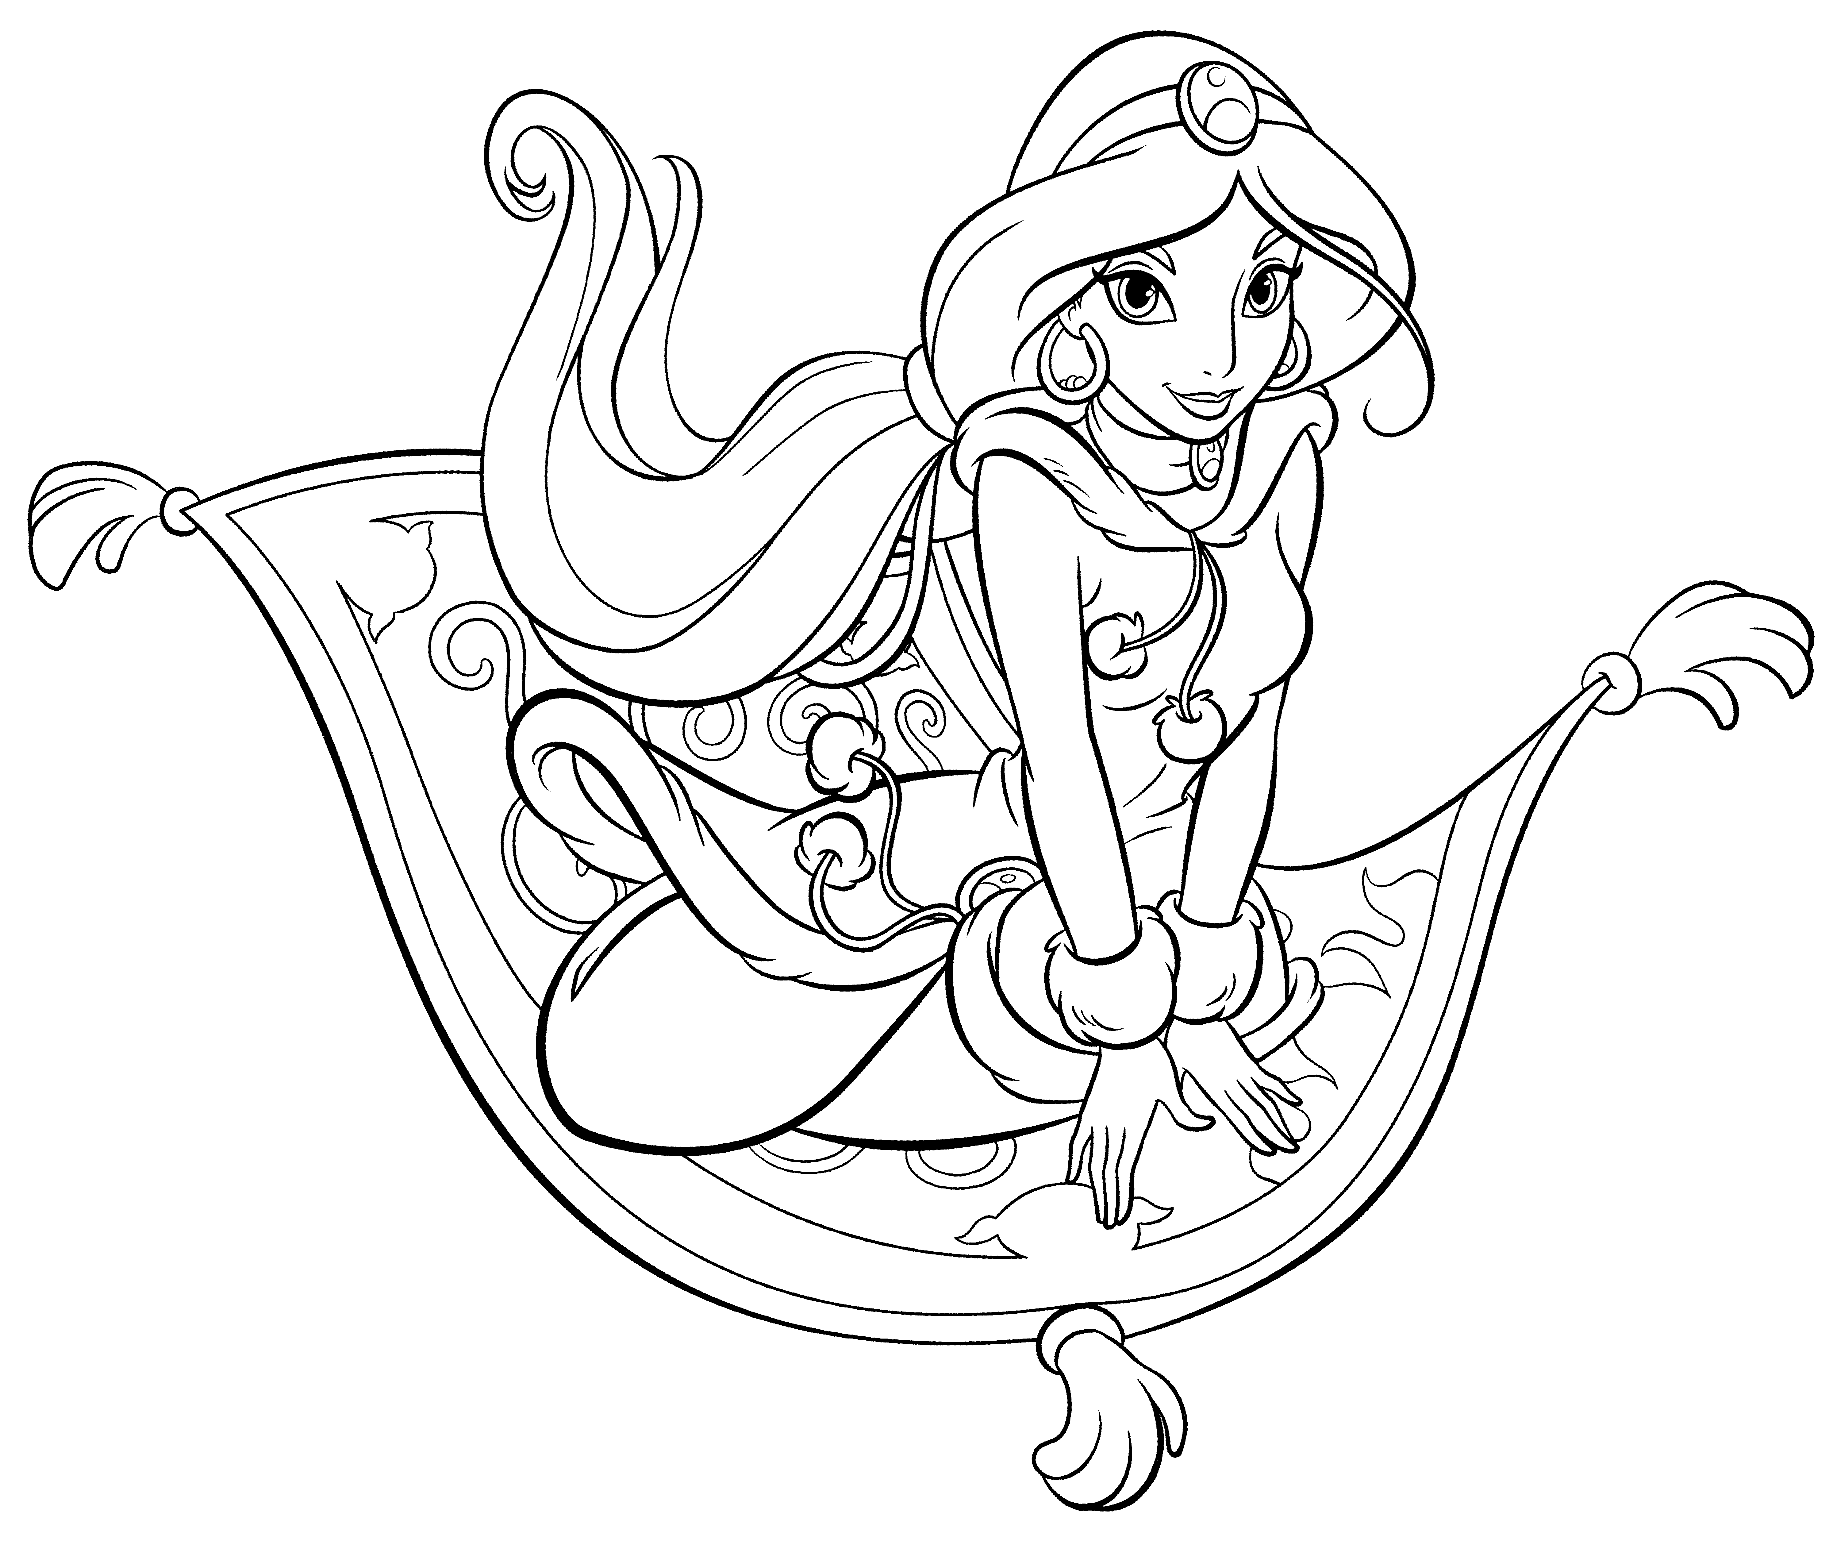 Jasmine on the carpet from Aladdin Coloring Pages